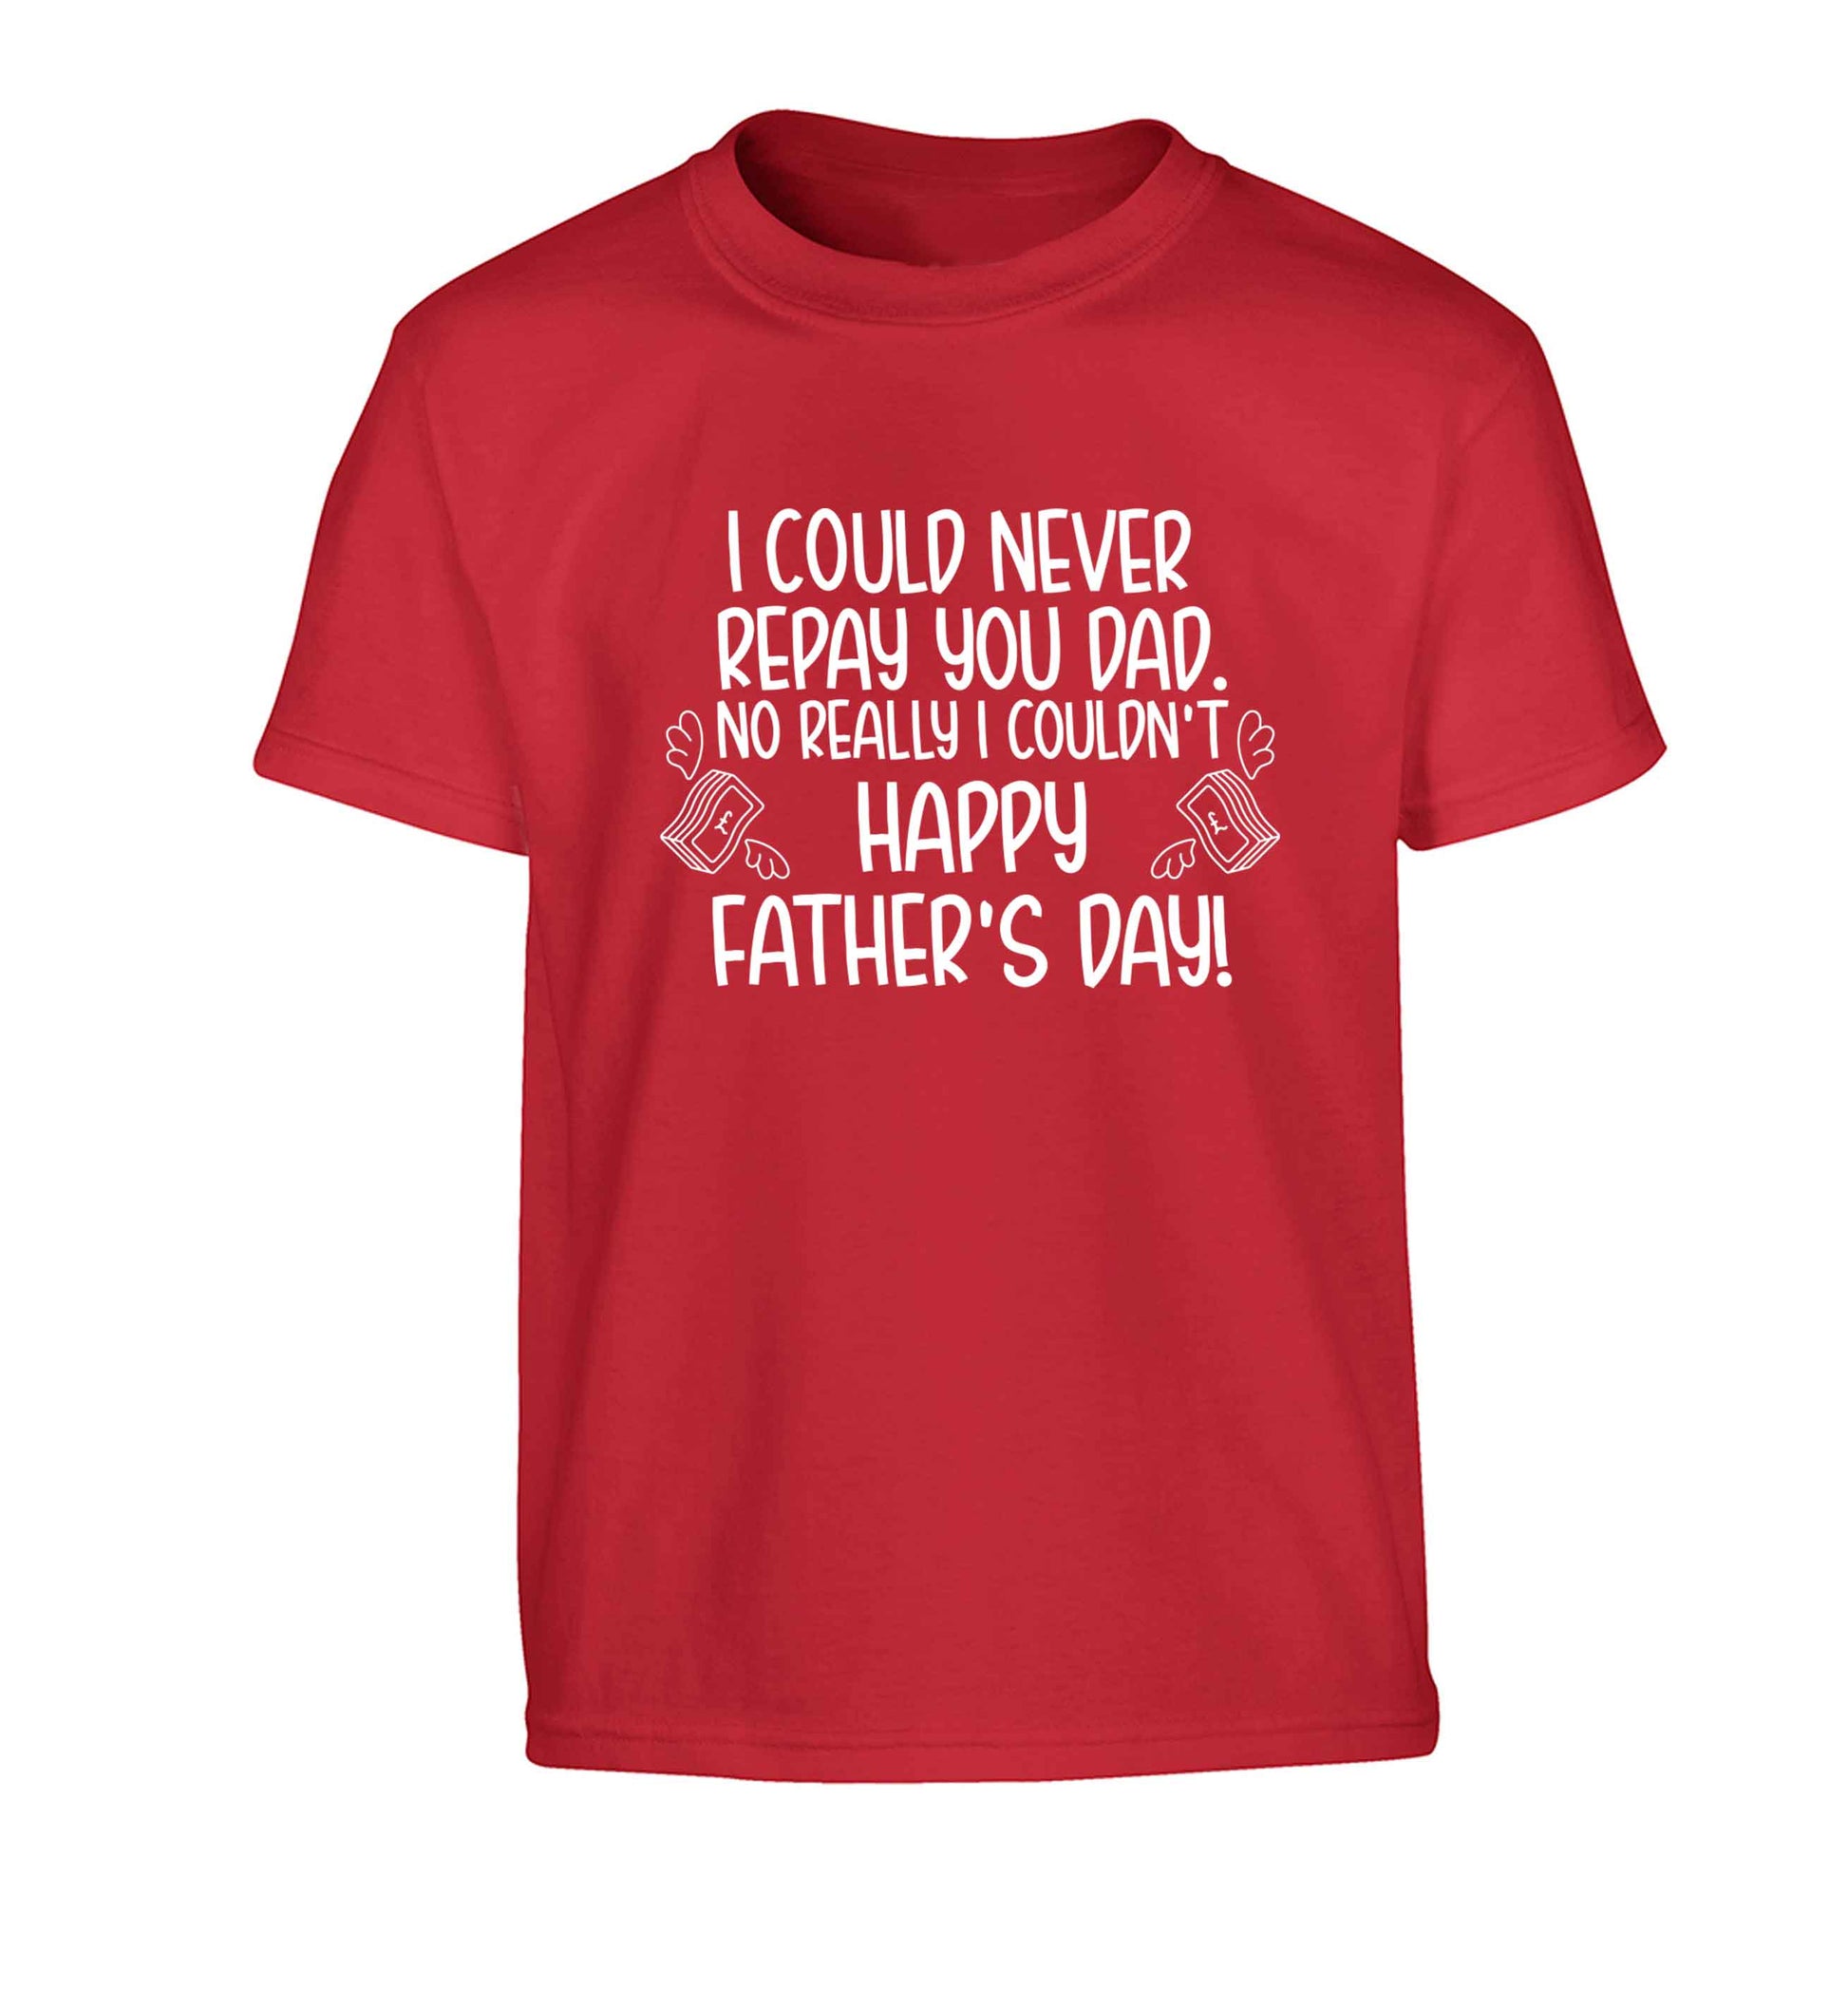 I could never repay you dad. No I really couldn't happy Father's day! Children's red Tshirt 12-13 Years